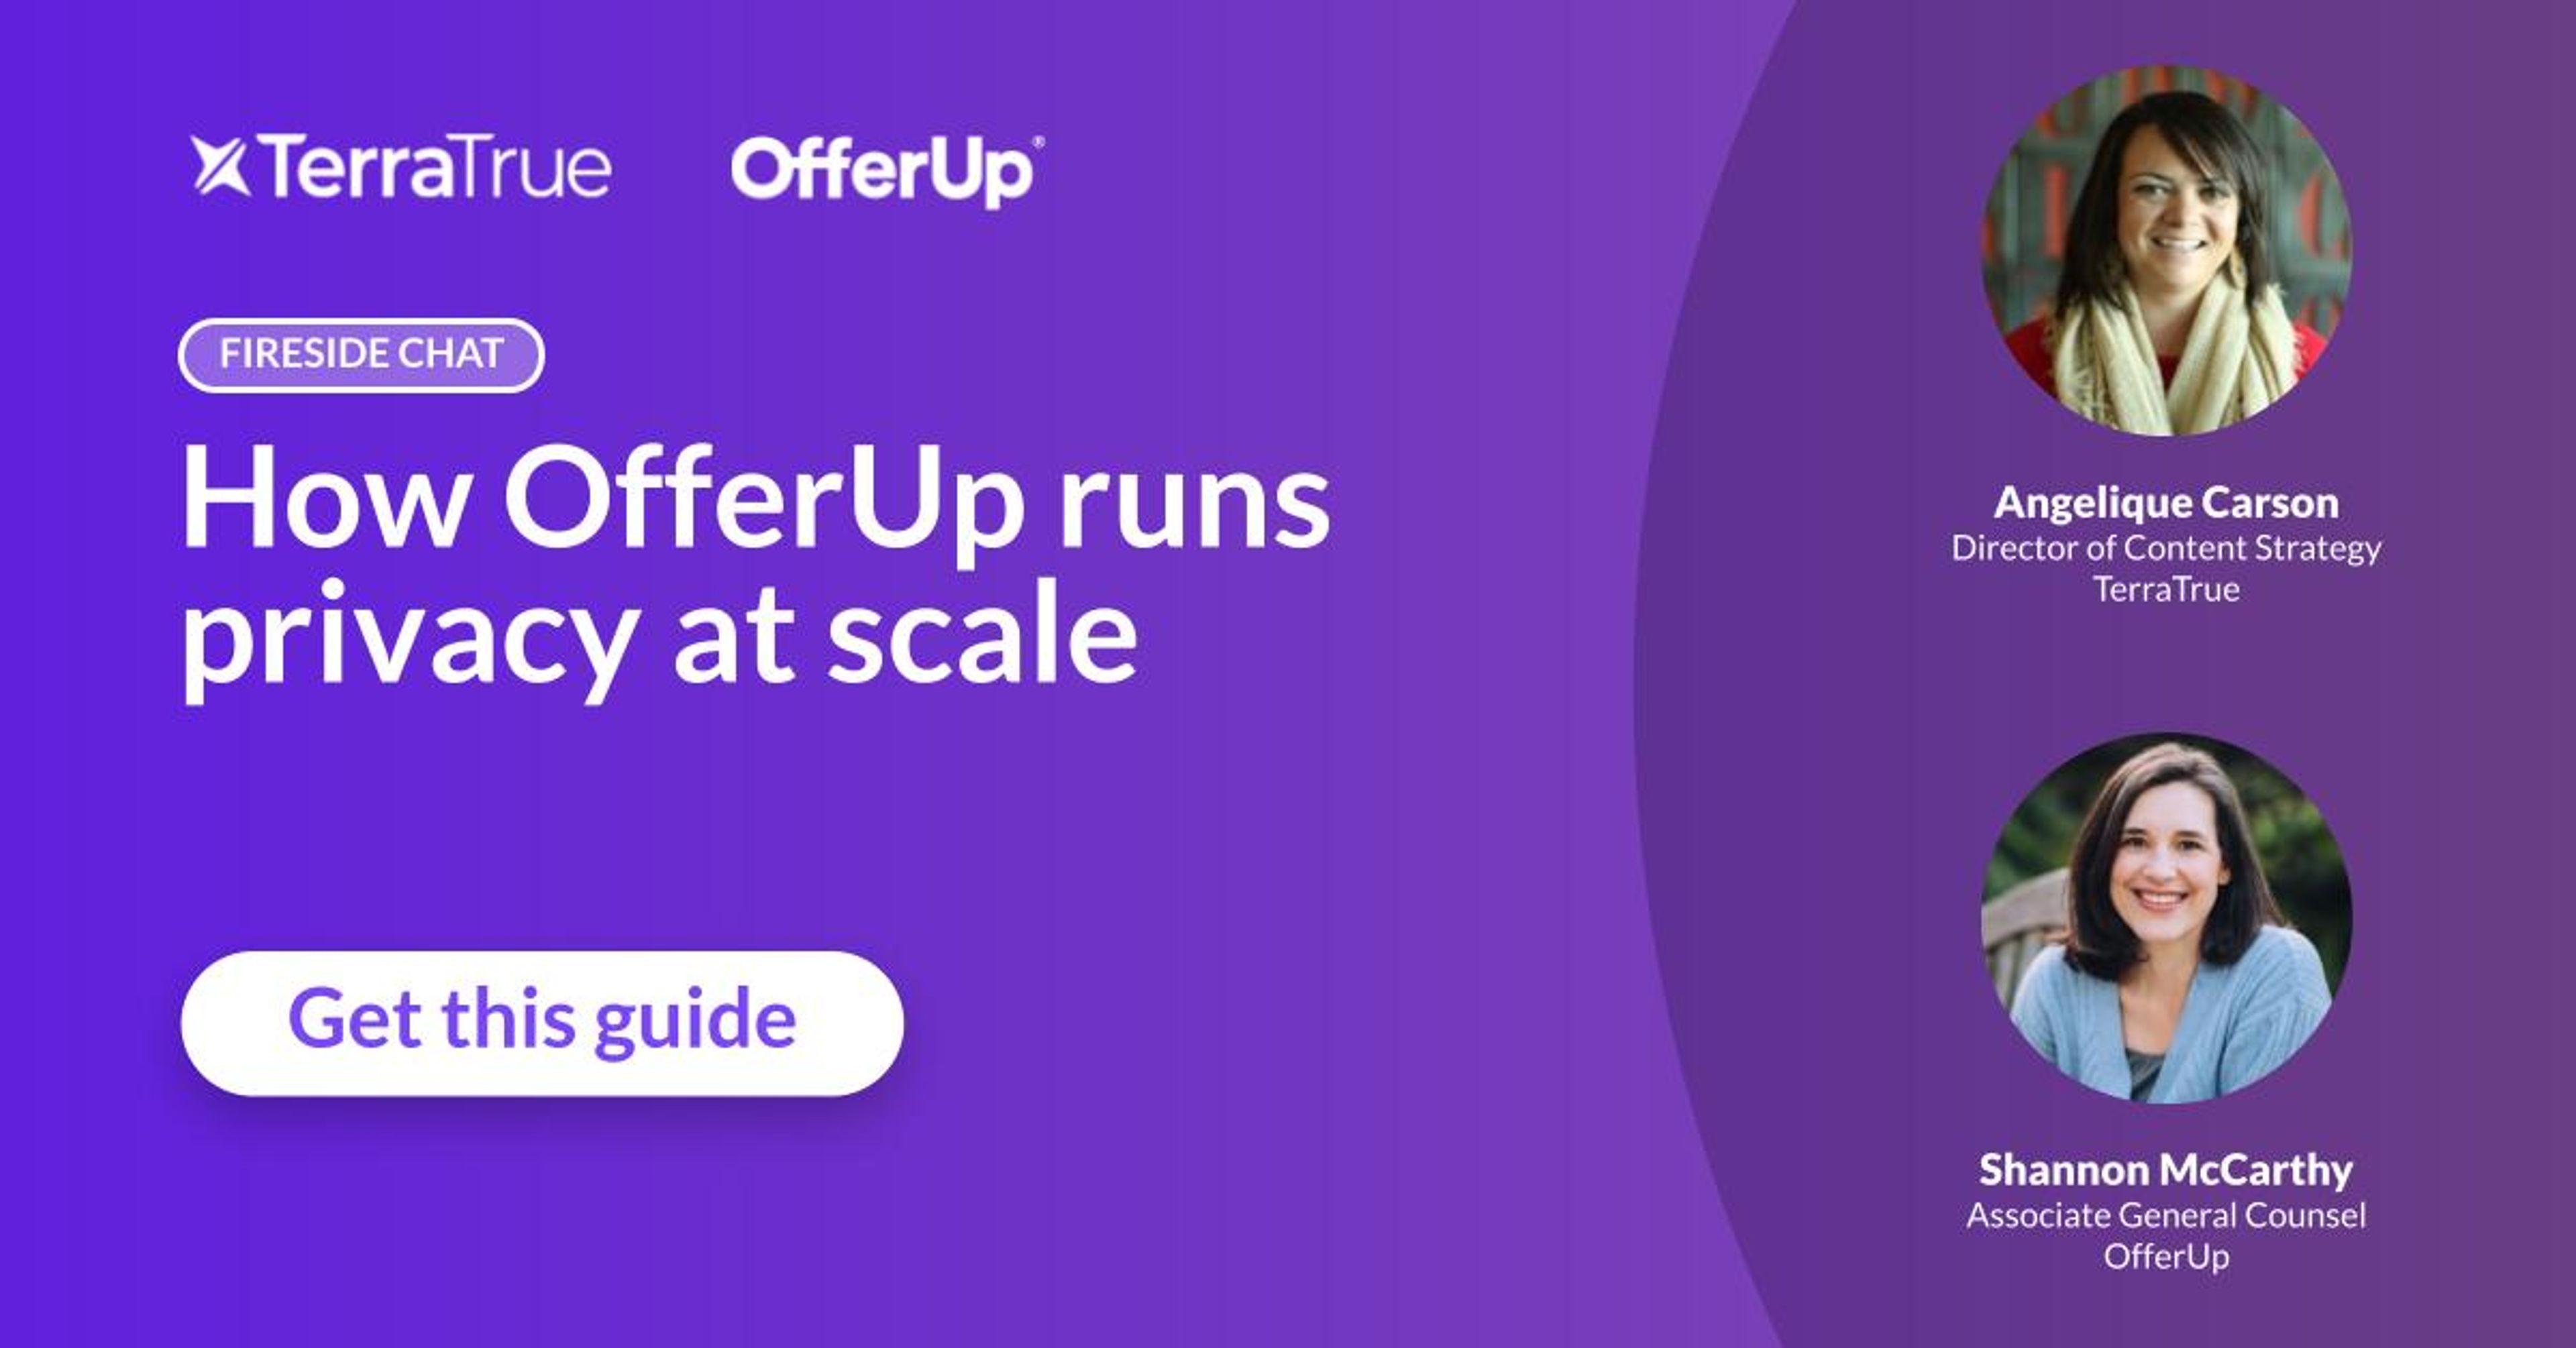 How OfferUp runs privacy at scale